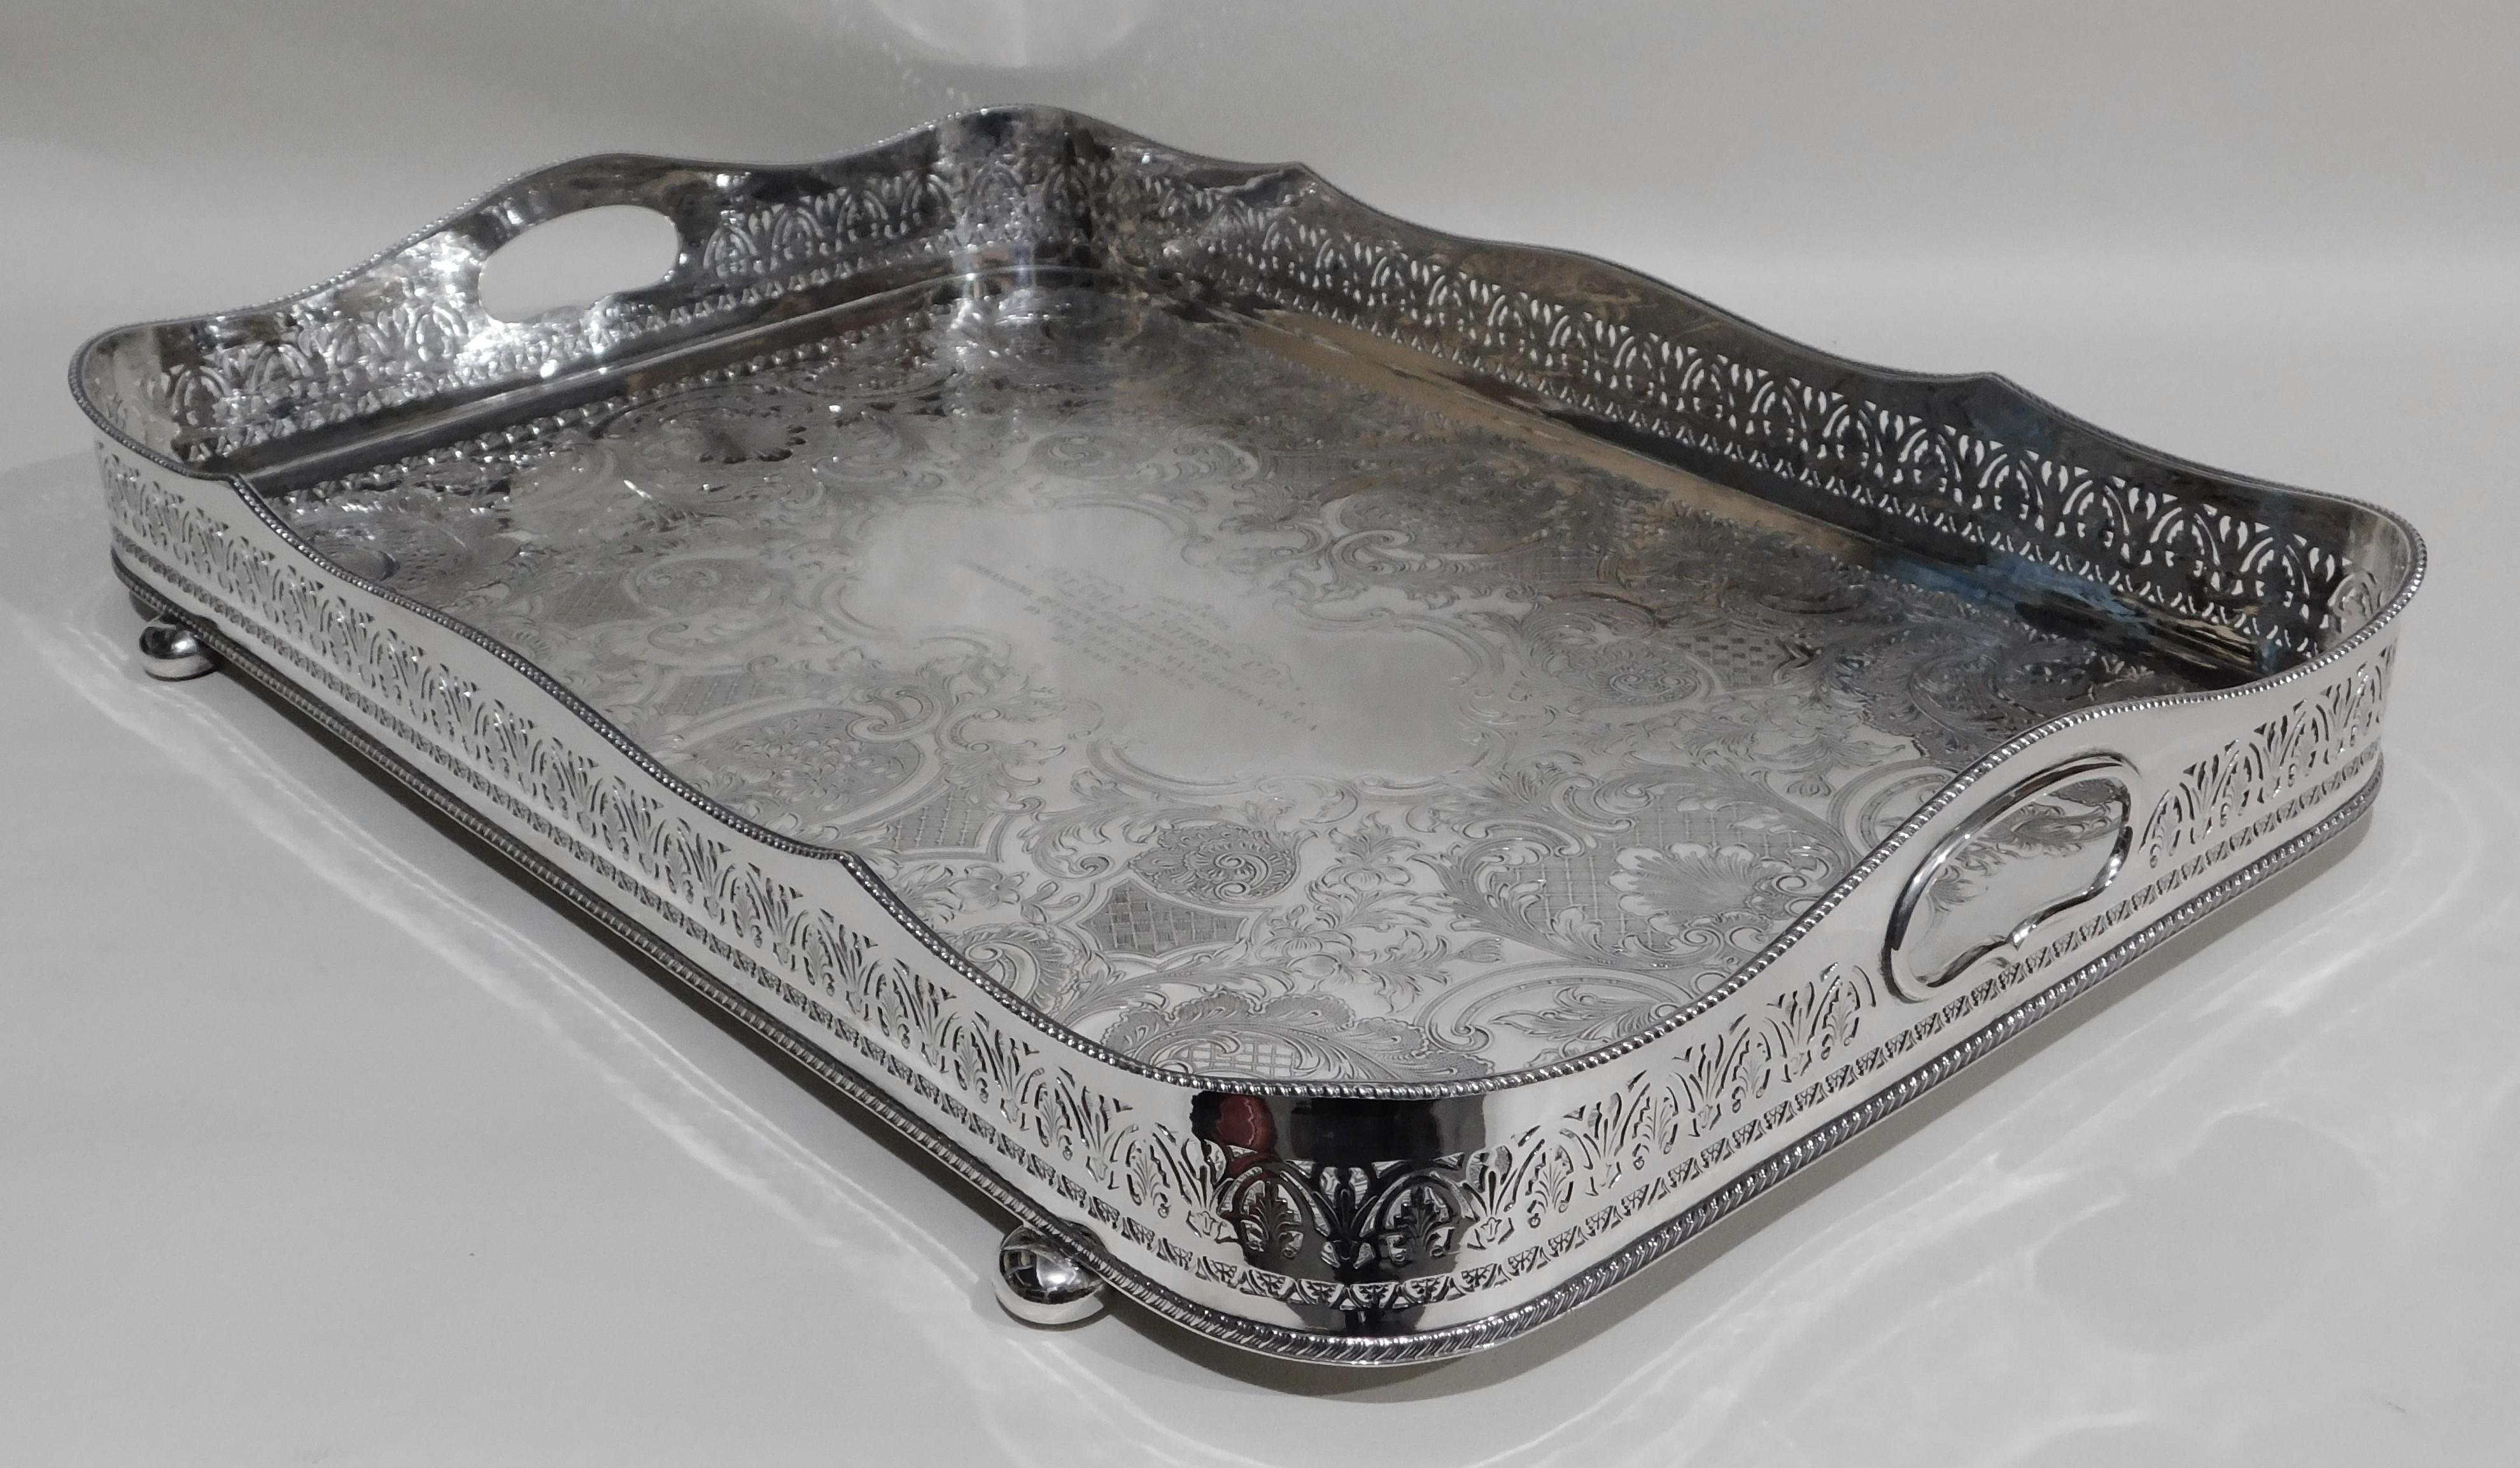 Large silver plated Birks English Regency plate serving tray, circa 1959. Presented by members of the military to LT Col J.T. Stubbs CD on Retirement as Commanding Officer 49 (SSM) MAA Regiment RCA (Royal Canadian Airforce) by the Officers Mess 20